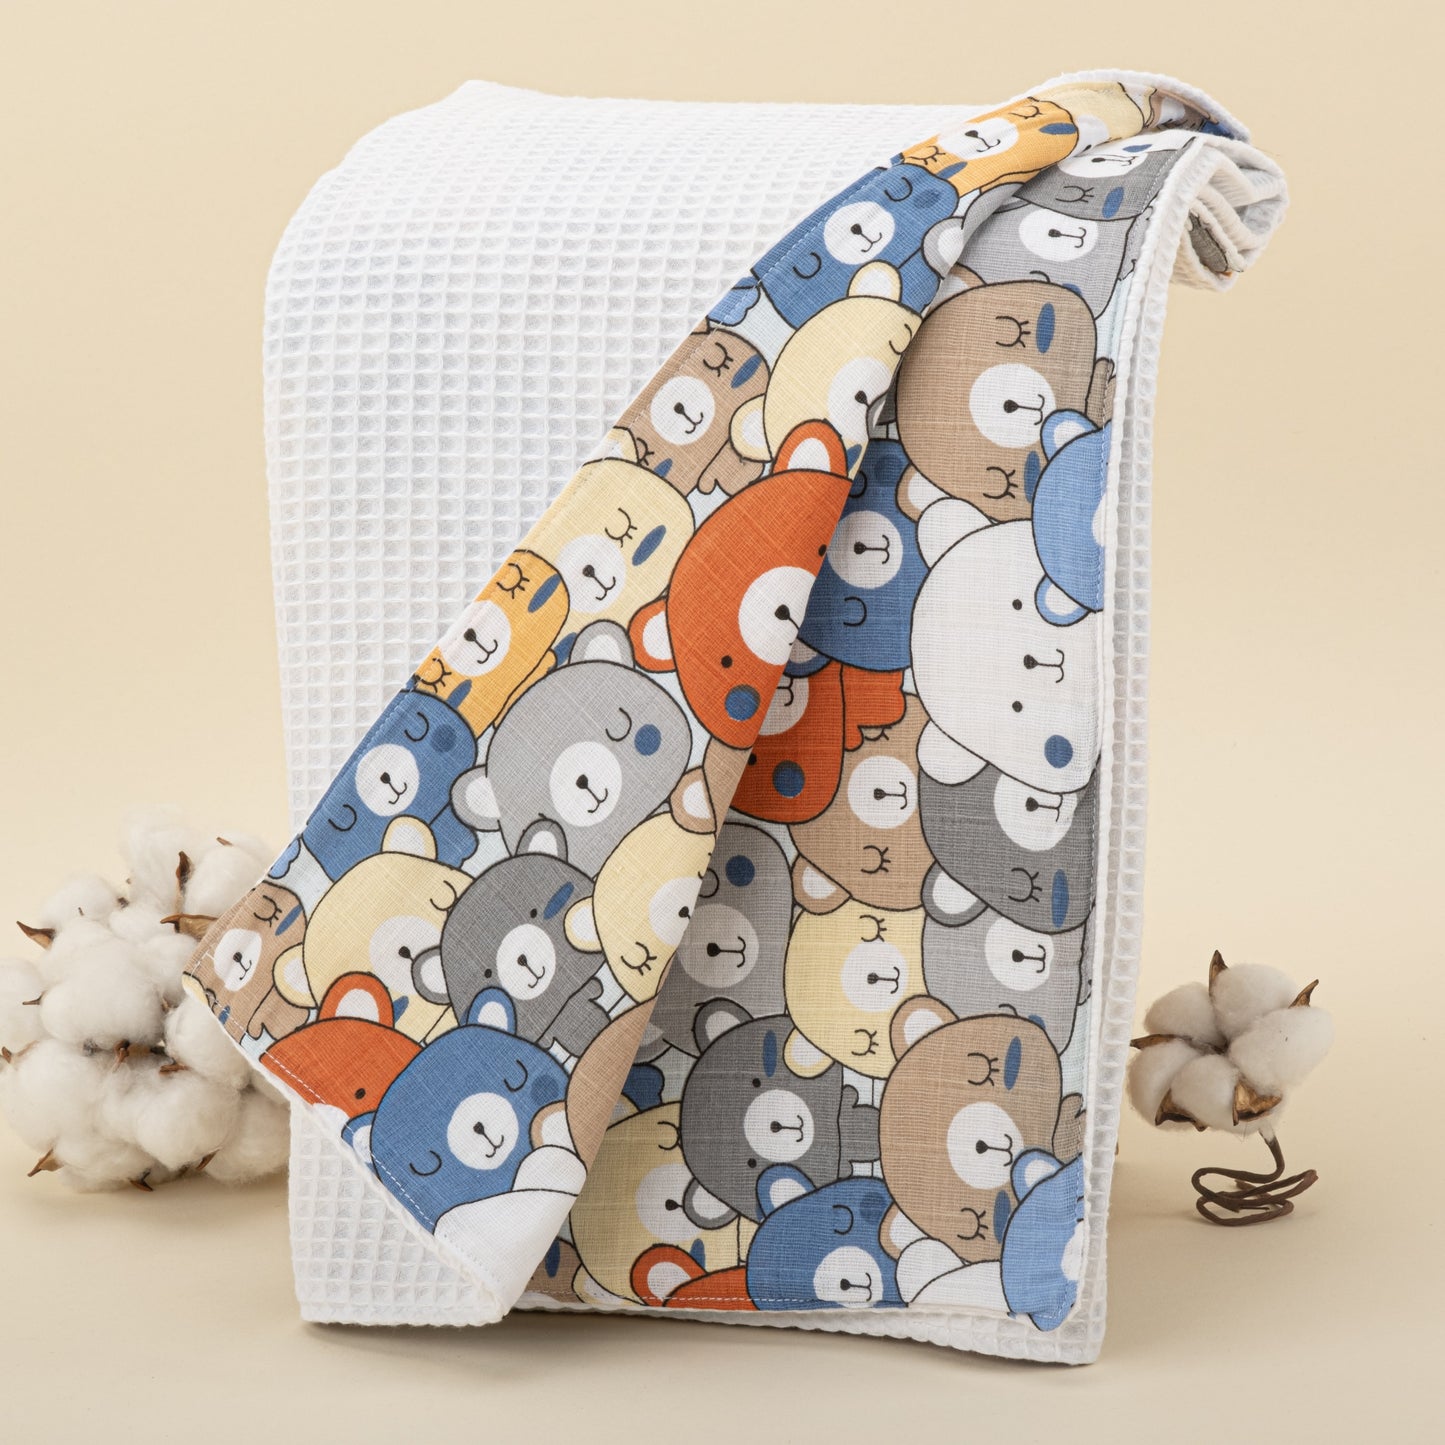 Pique Blanket - Double Side - White Honeycomb - Colorful Teddy Bears